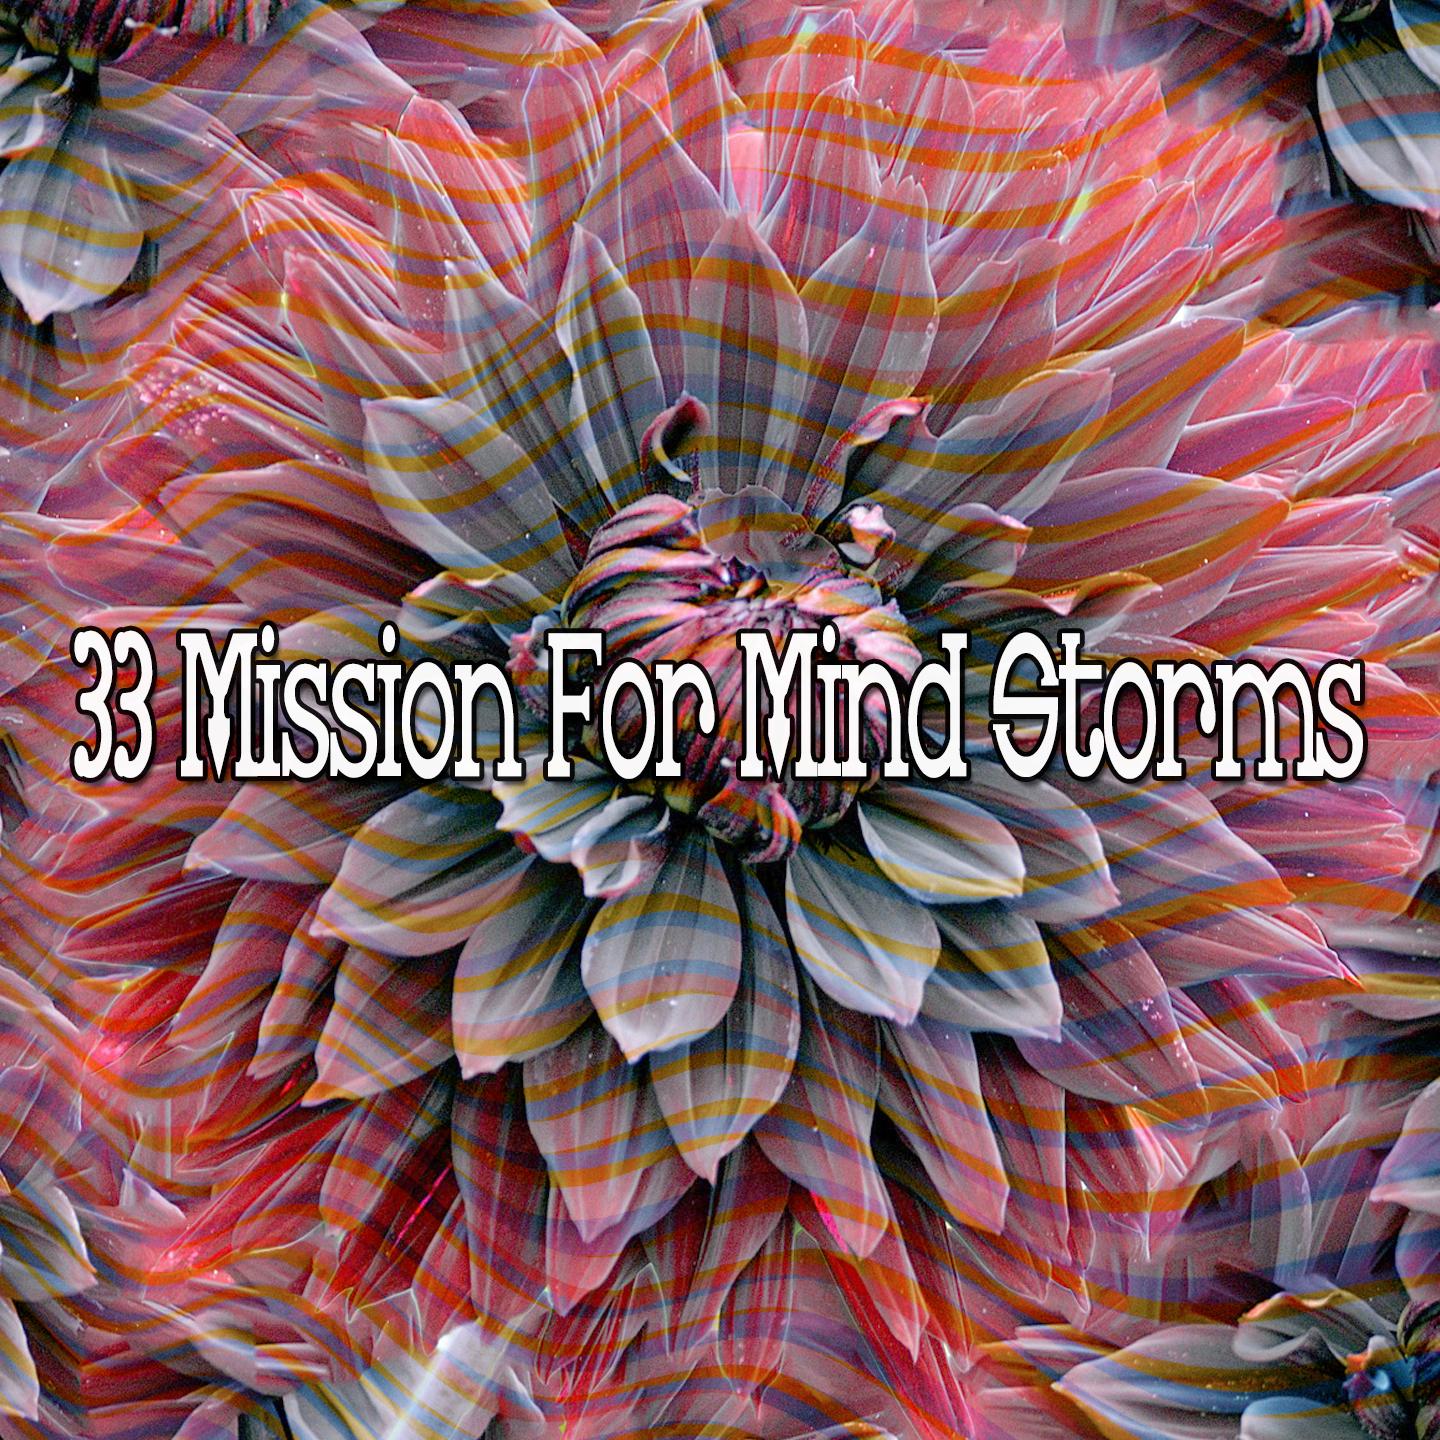 33 Mission for Mind Storms